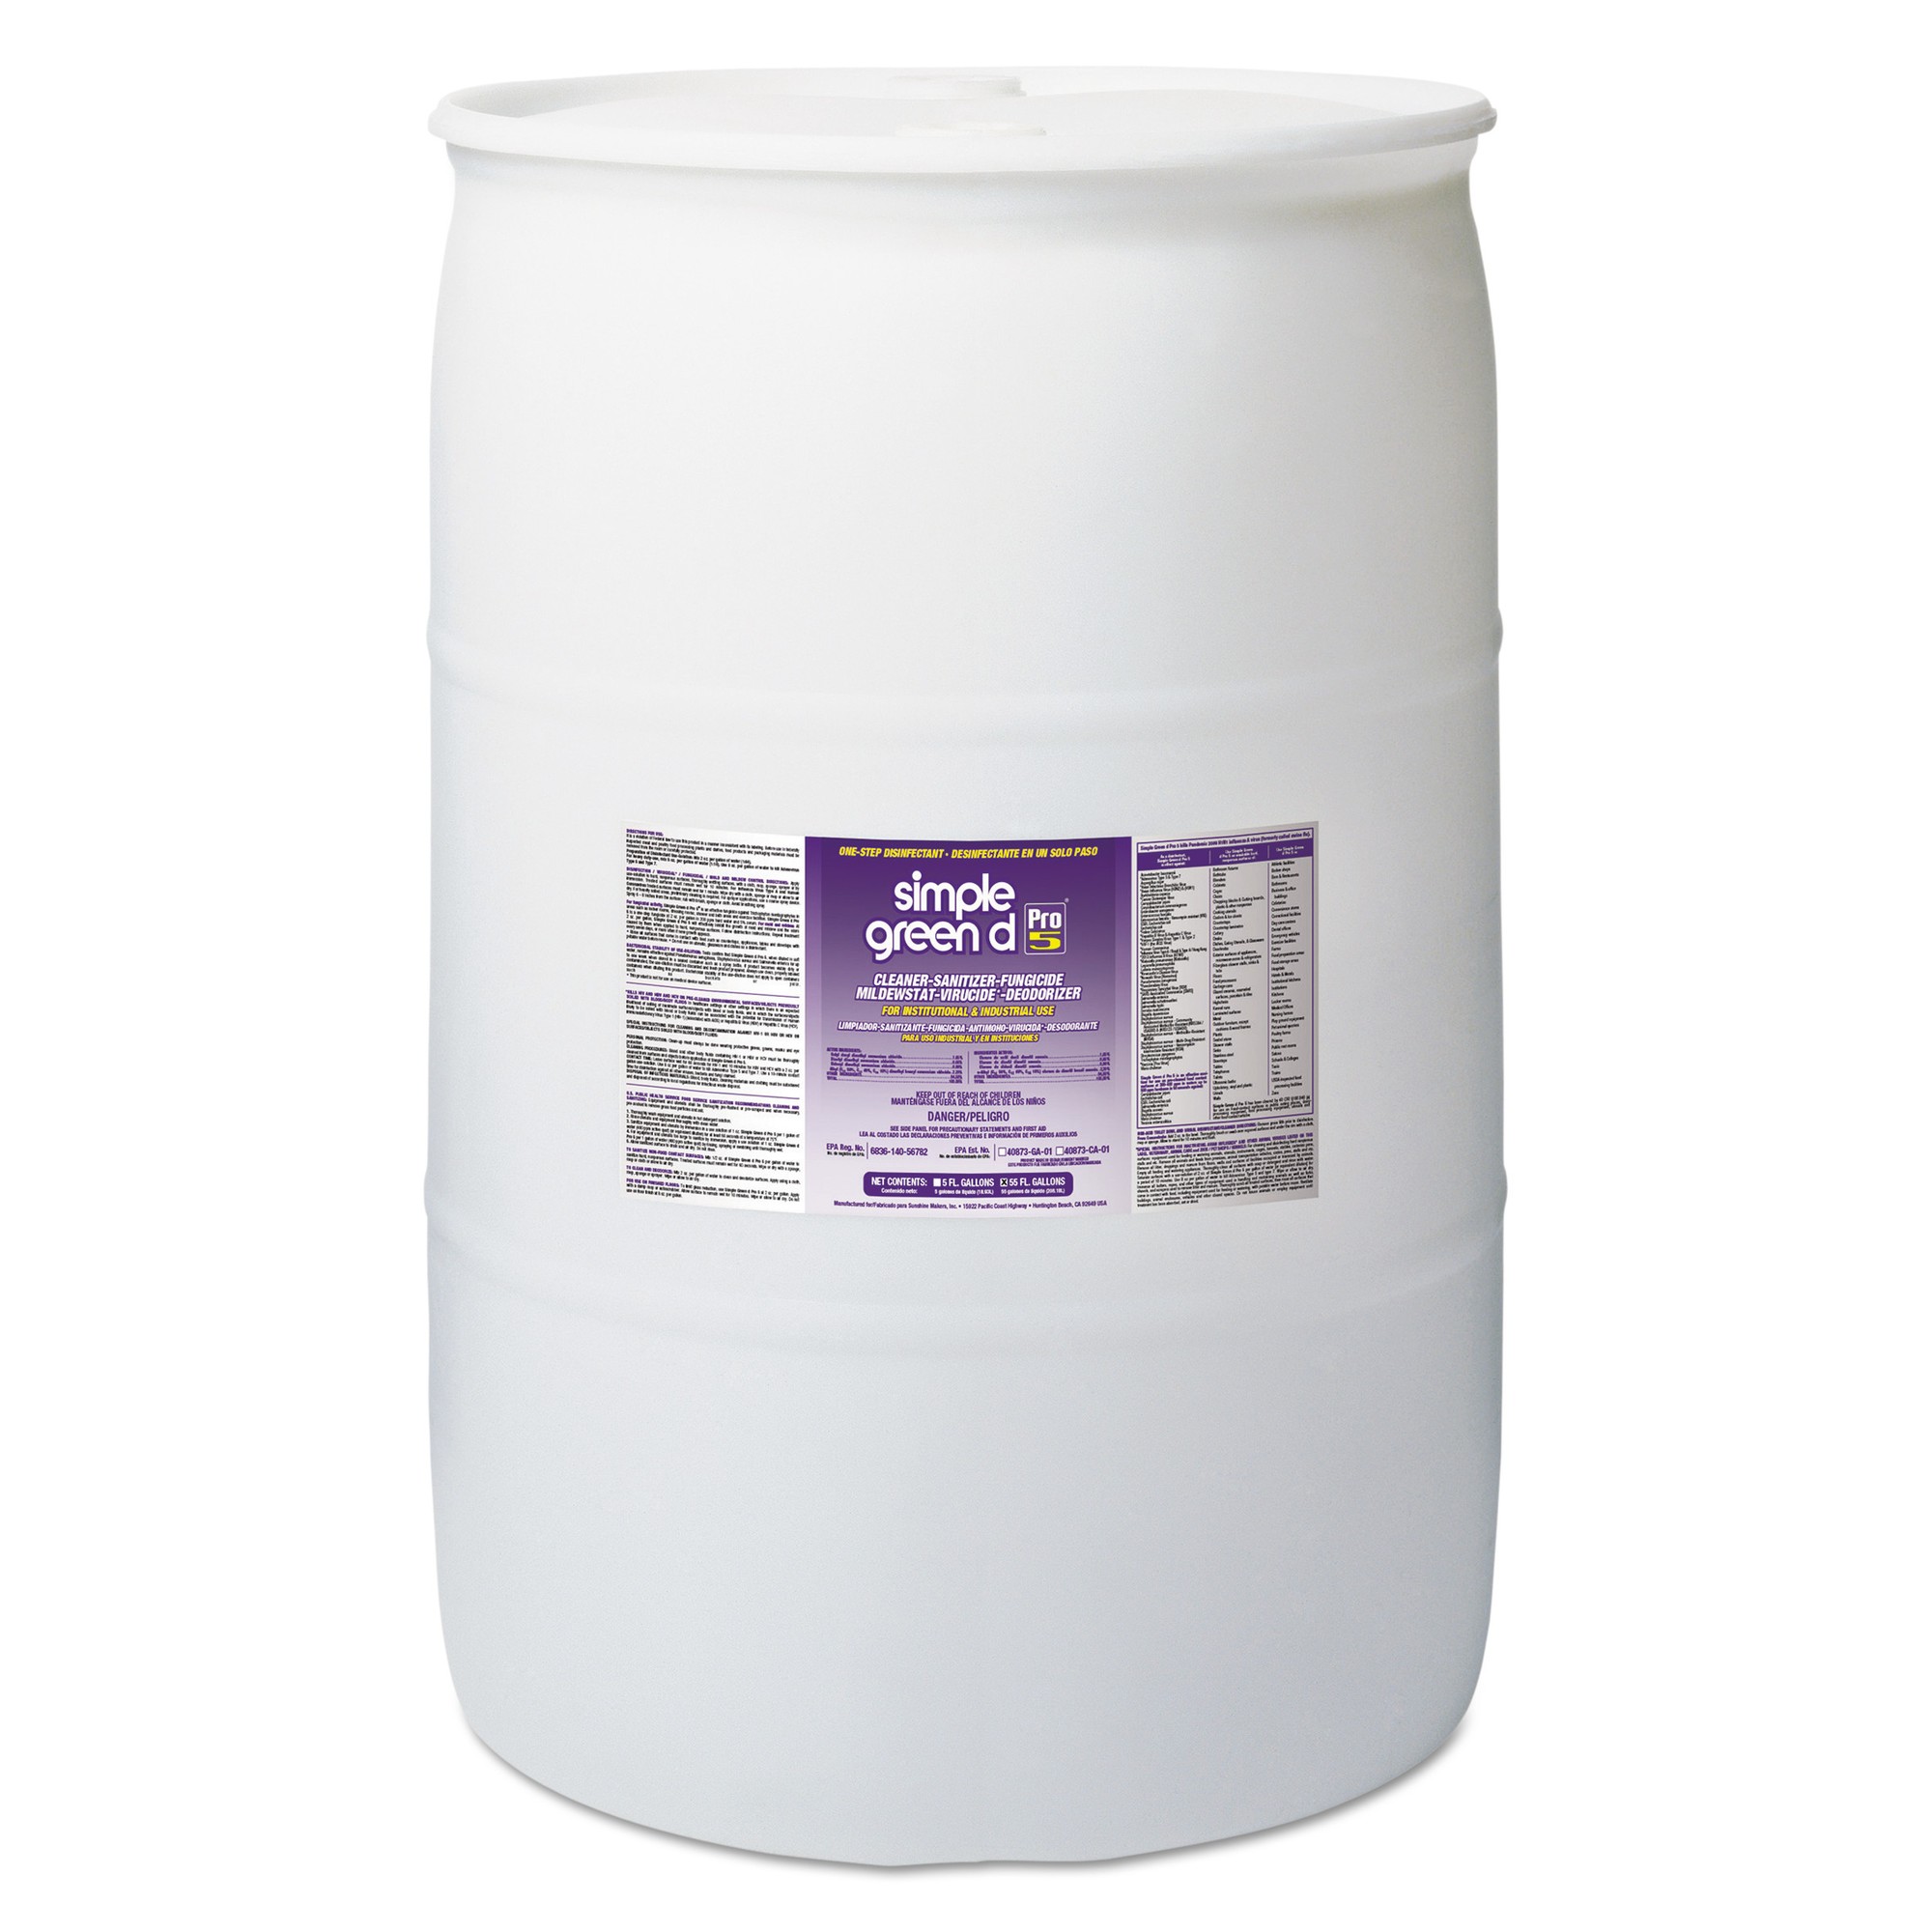 Simple Green d Pro 5 One-Step Disinfectant - 55 Gal., ea, 